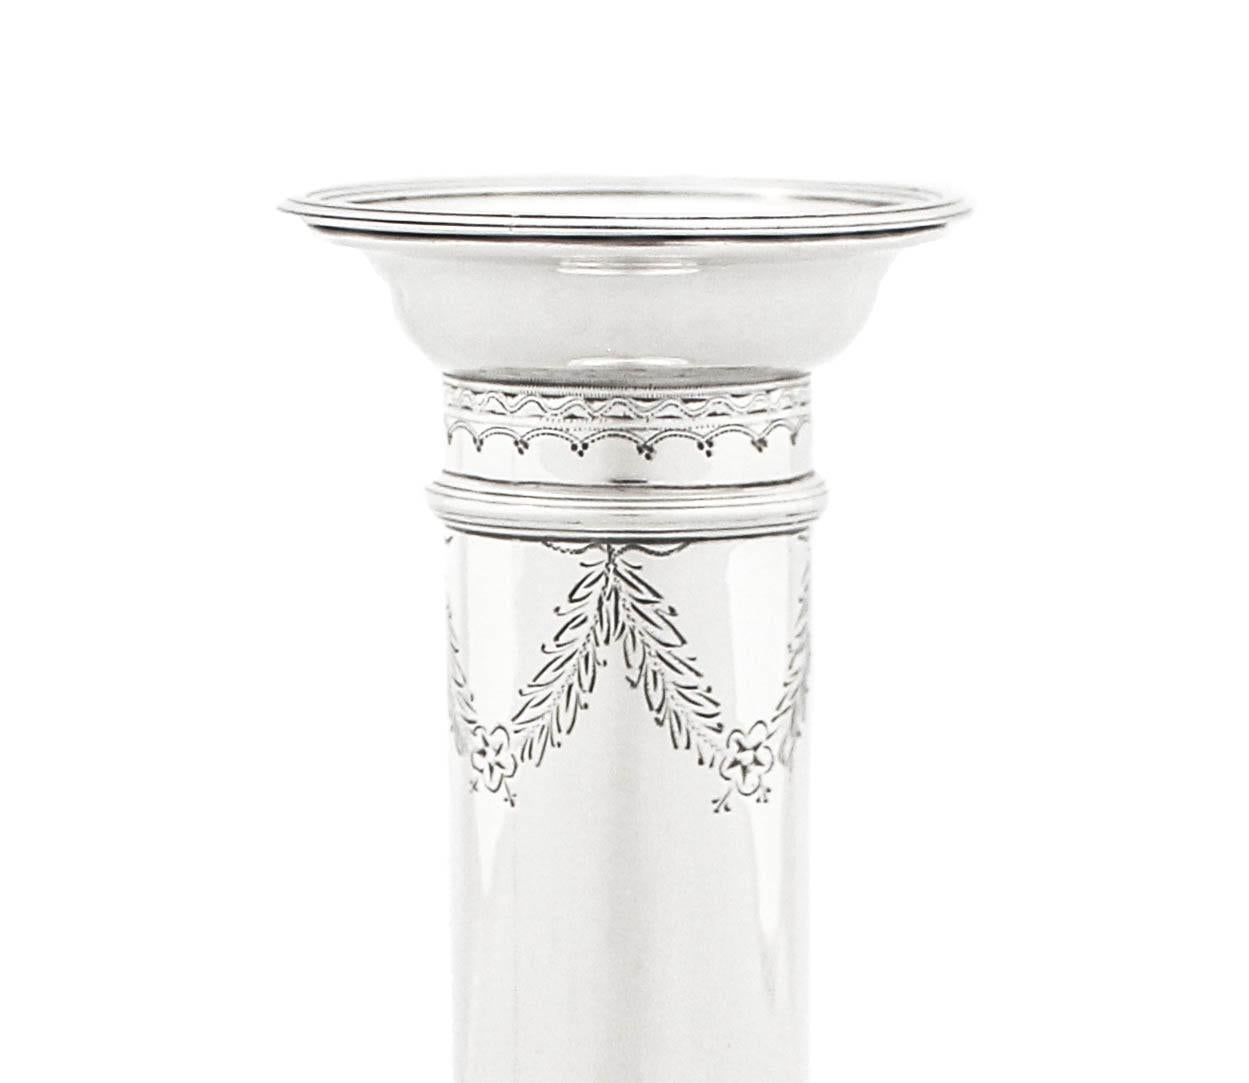 sterling silver candlesticks for sale